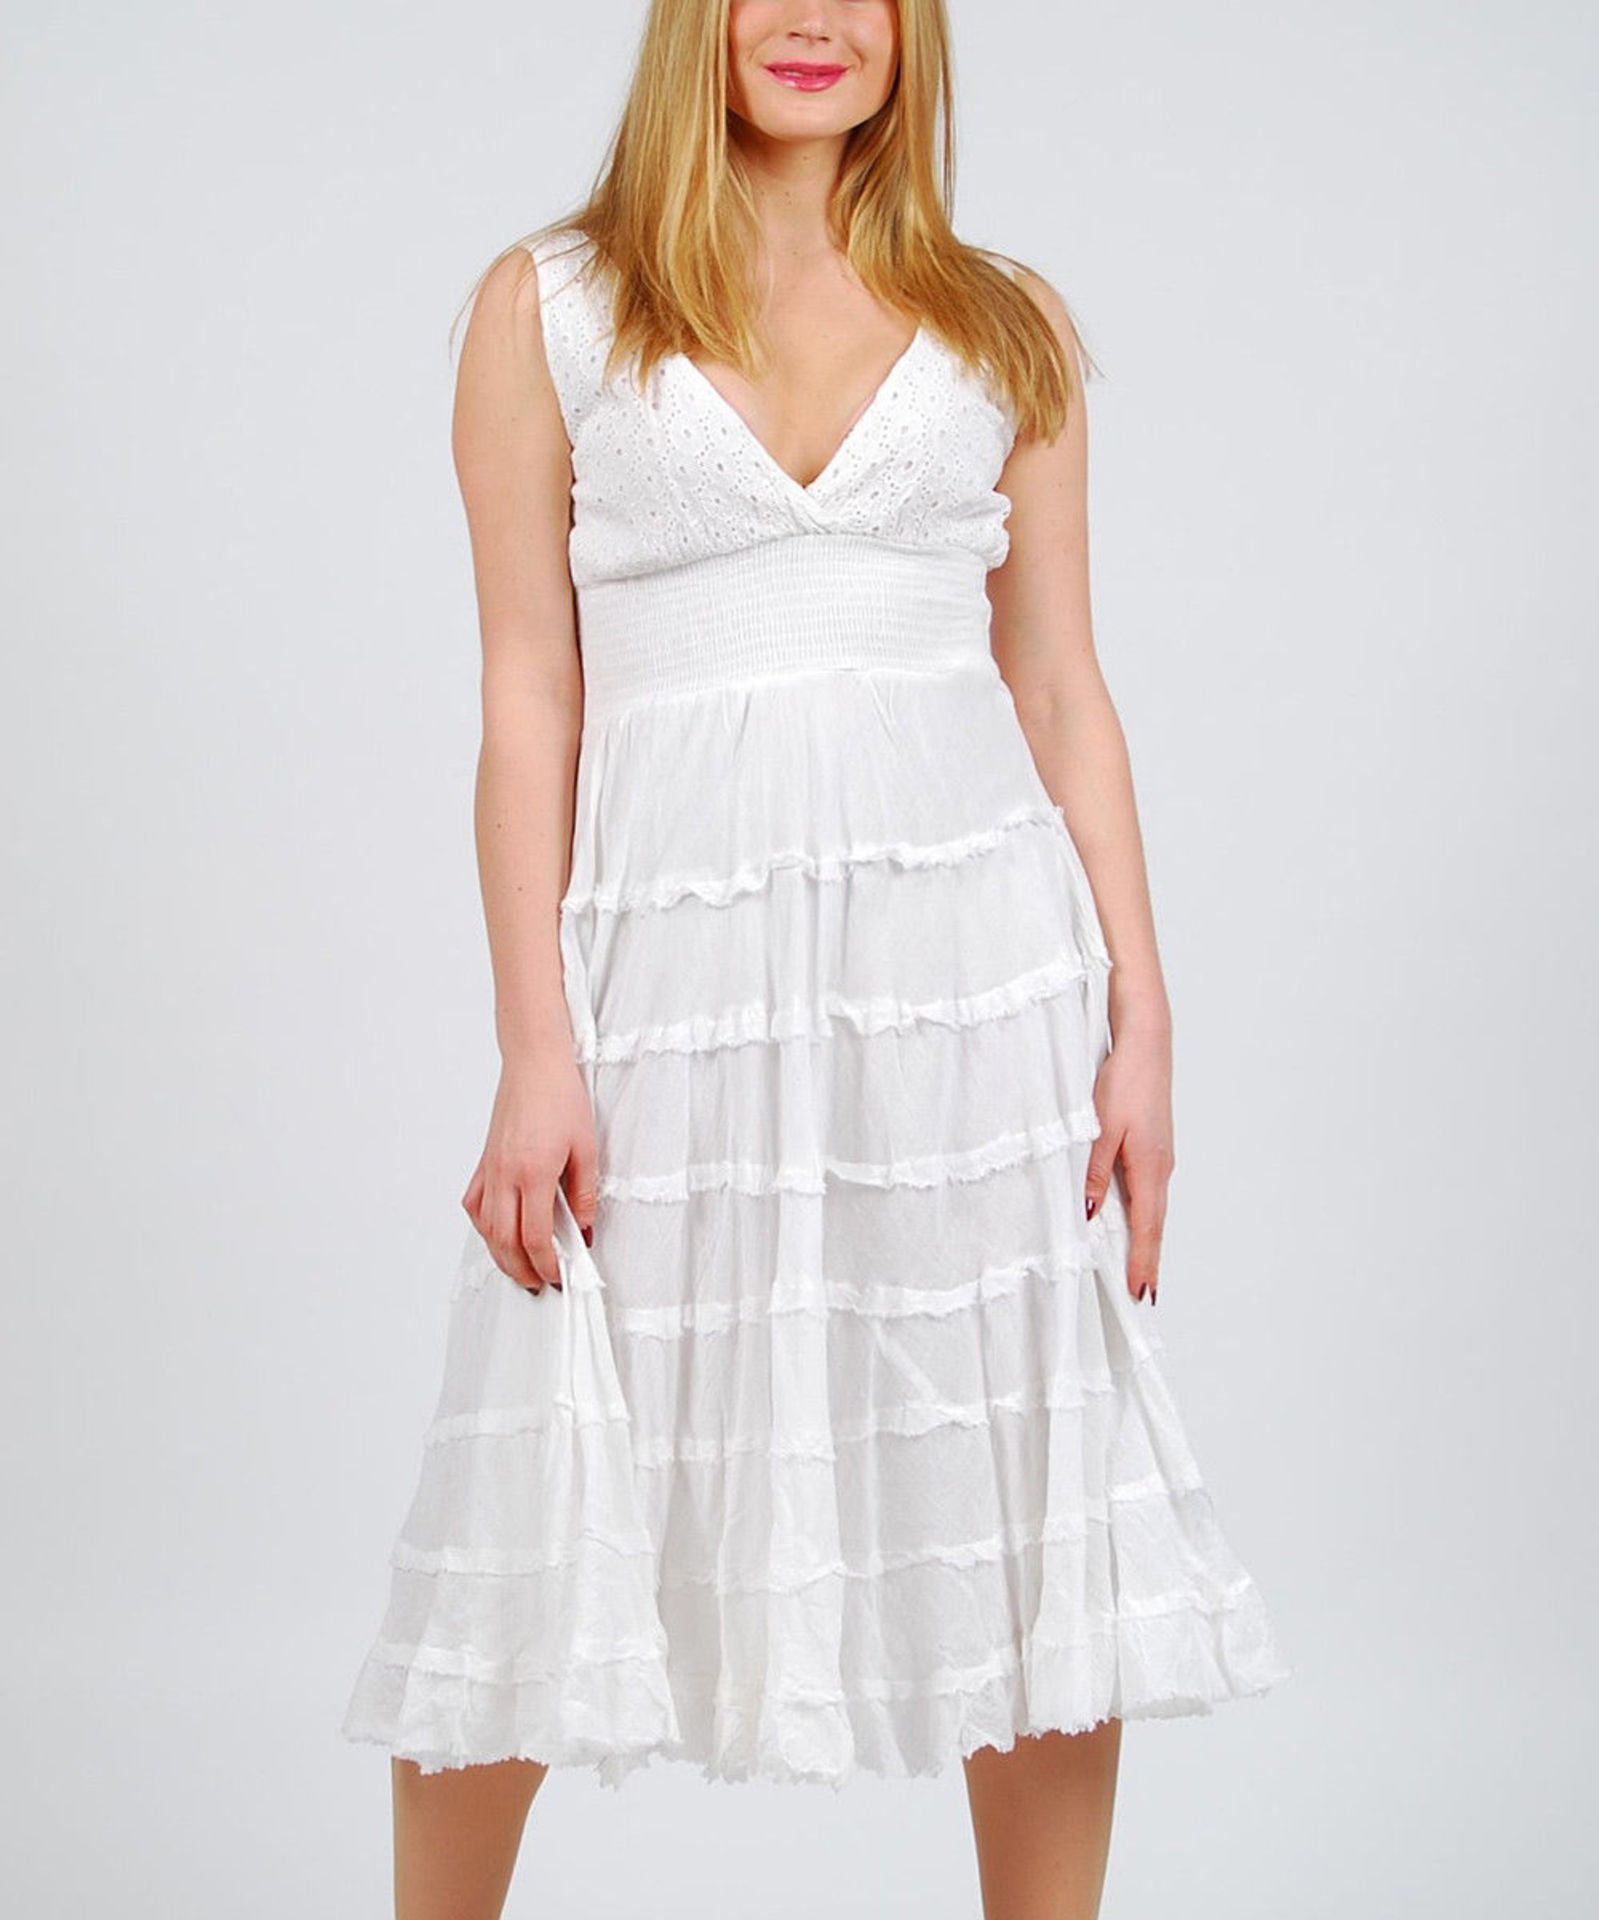 White Shirred Surplice Maxi Dress - Plus (Uk Size 22/24:Us Size 18/20) (New with tags) [Ref: